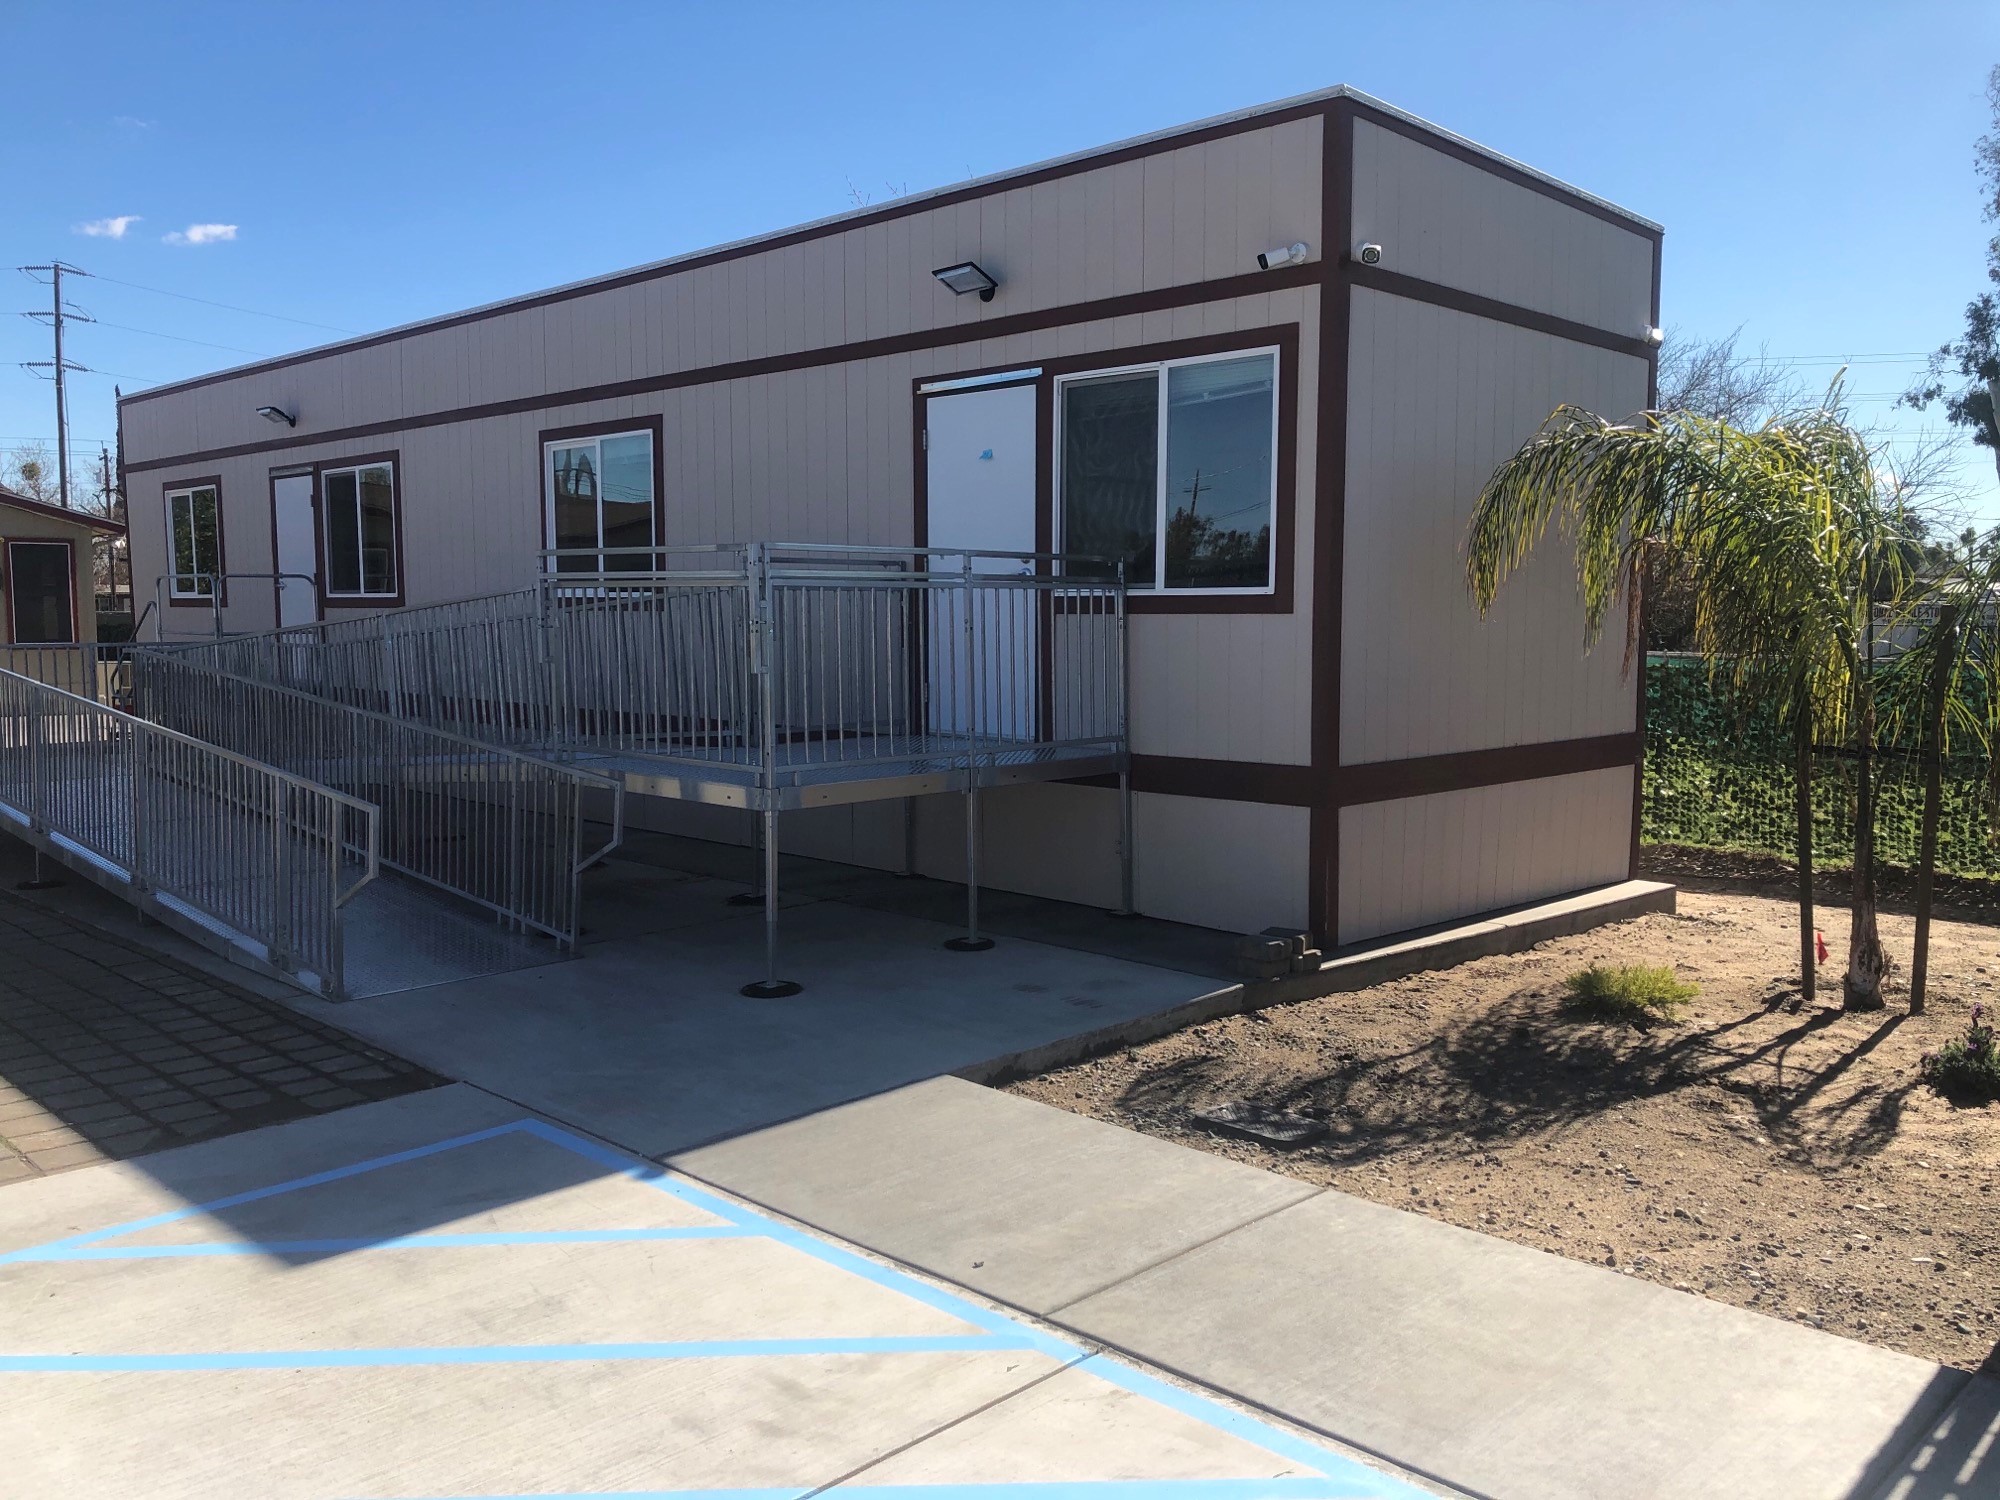 California’s Psychiatric Care Facility Provided Additional Space to Expand